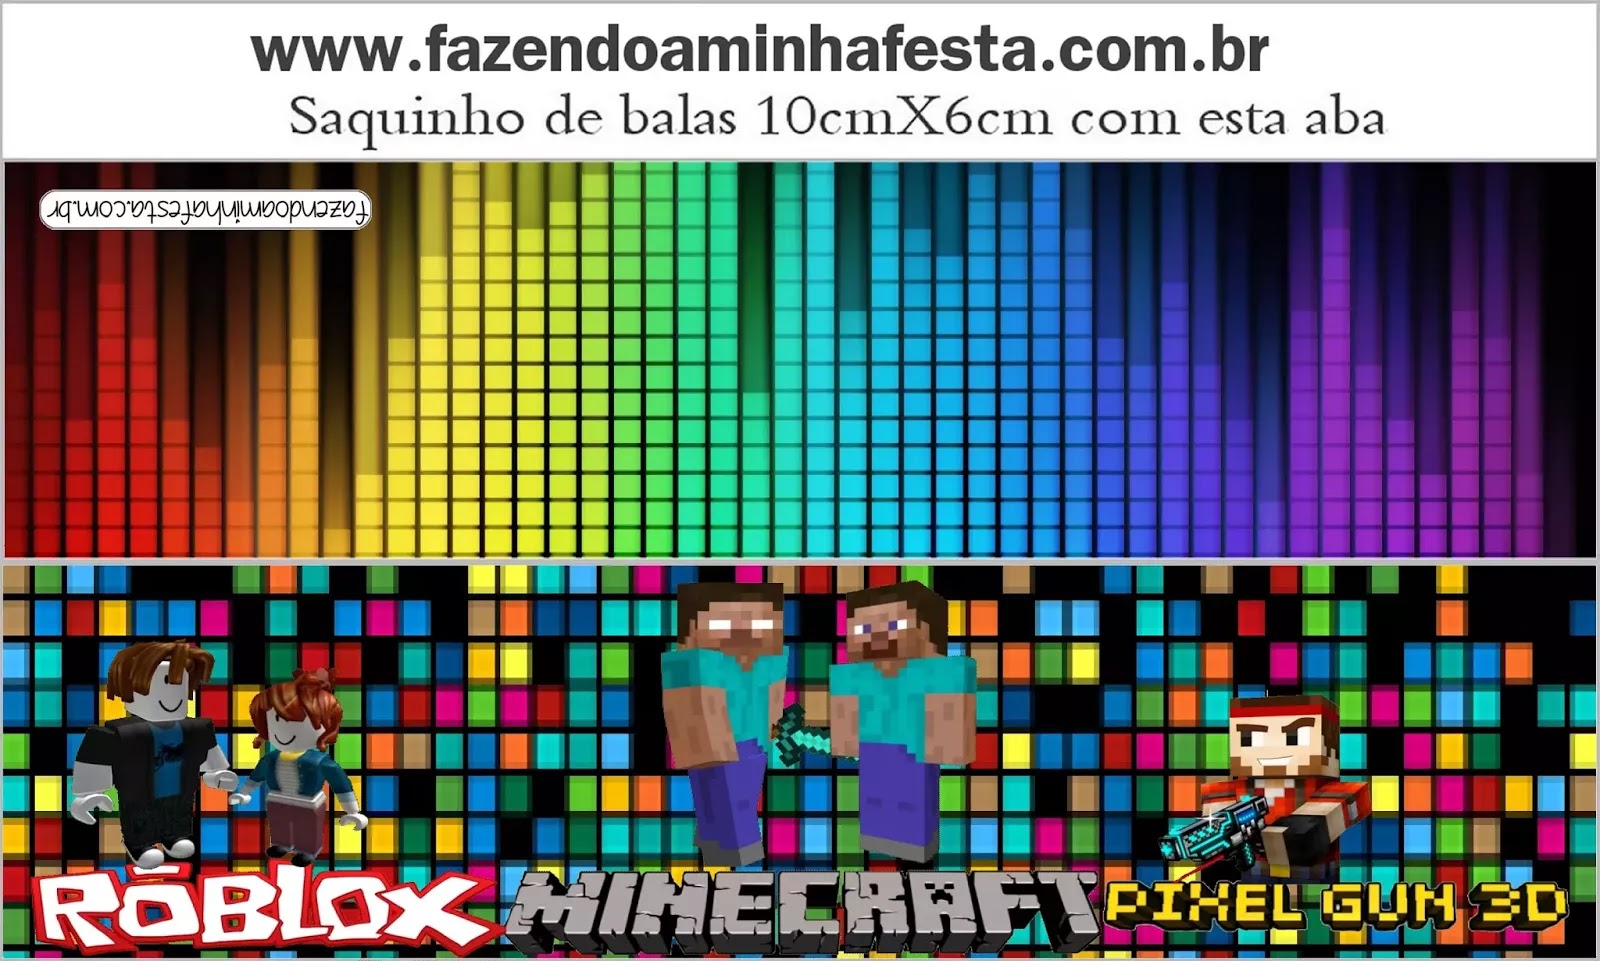 Personalizados Roblox Para Imprimir Codes For Free Robux Cards Never Used And Never Watched - aesthetic plantilla de ropa de roblox png